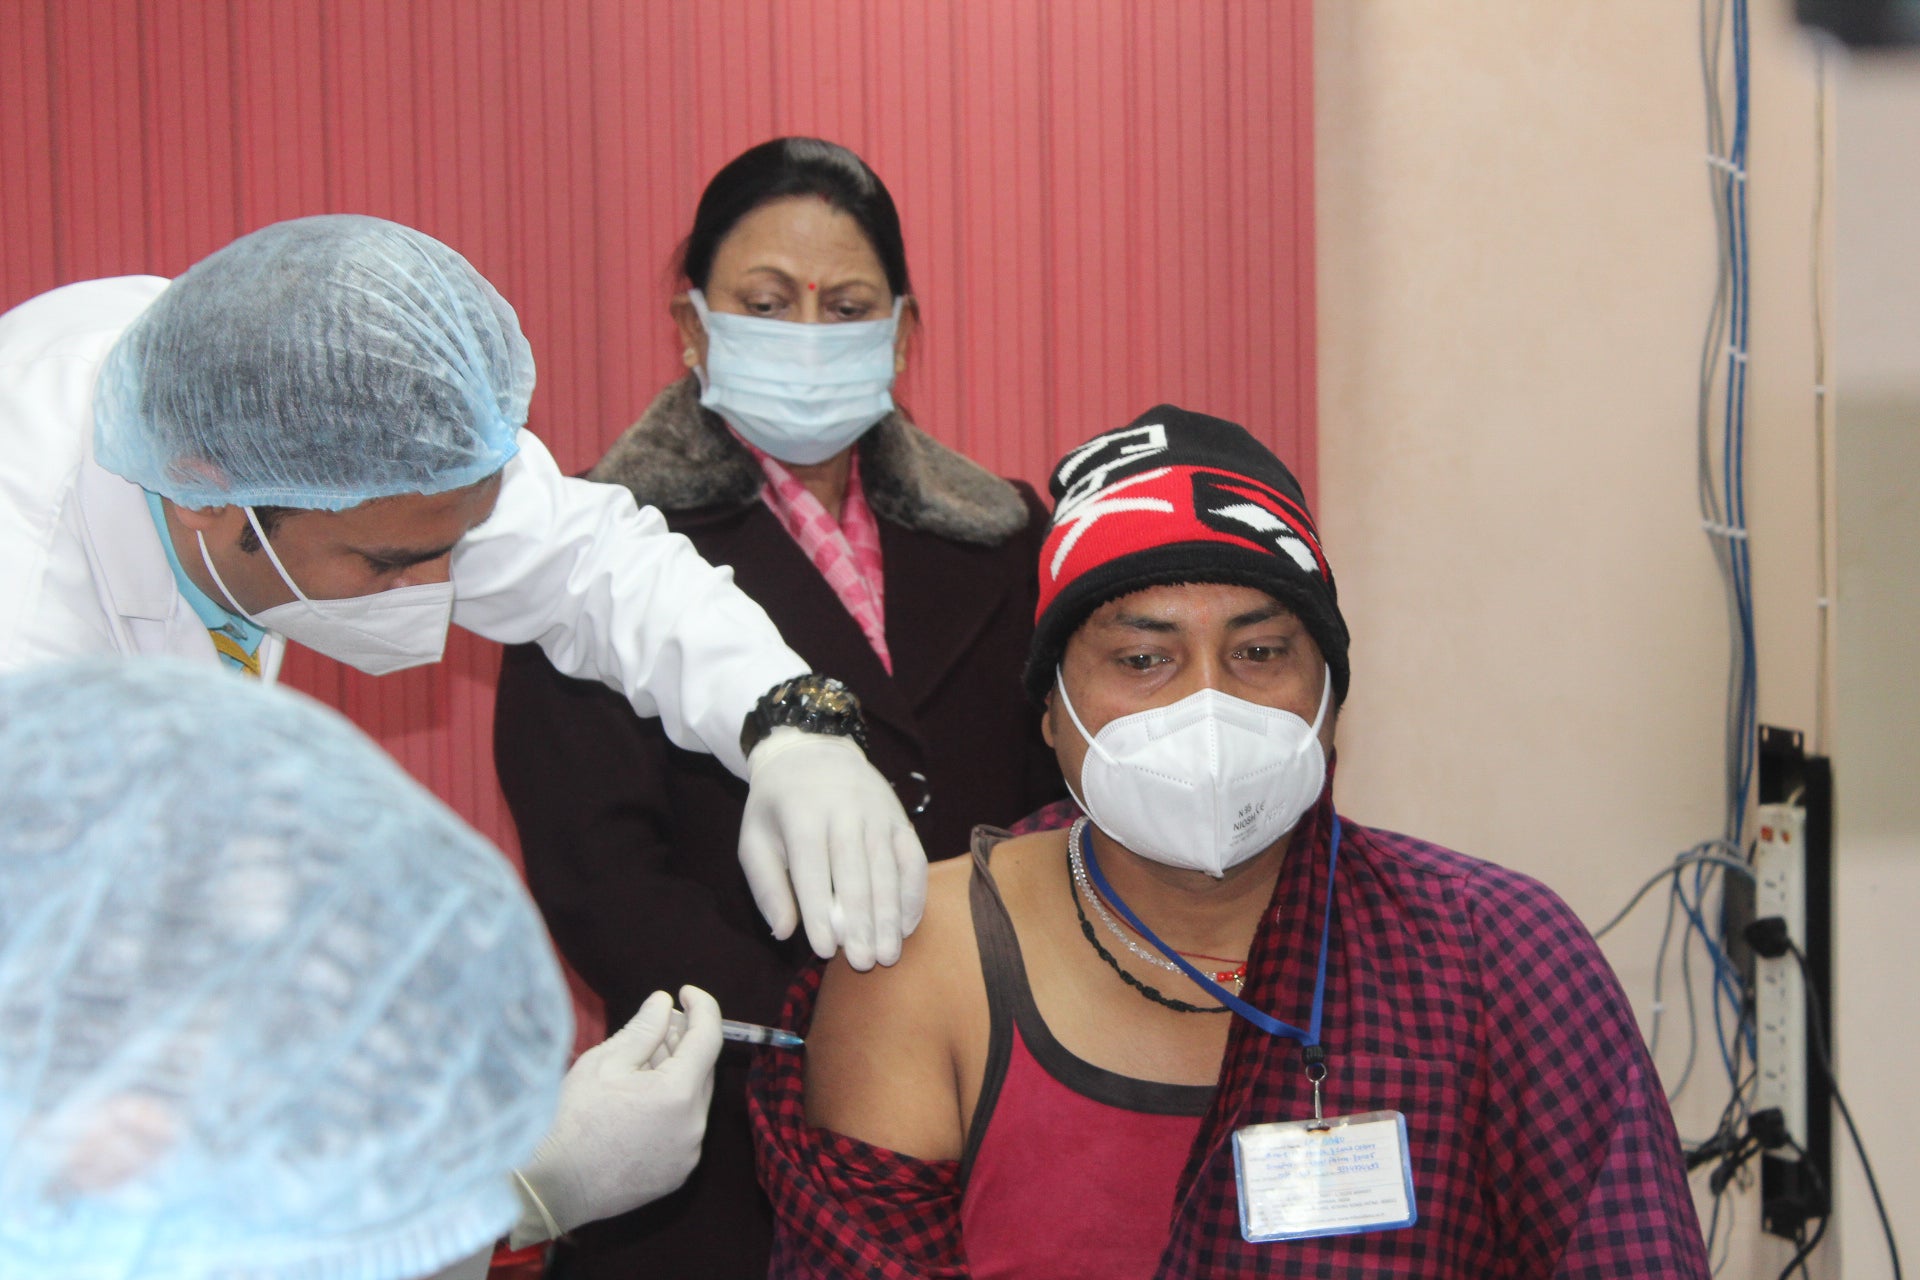 A health care worker administers a COVID-19 vaccination in India.